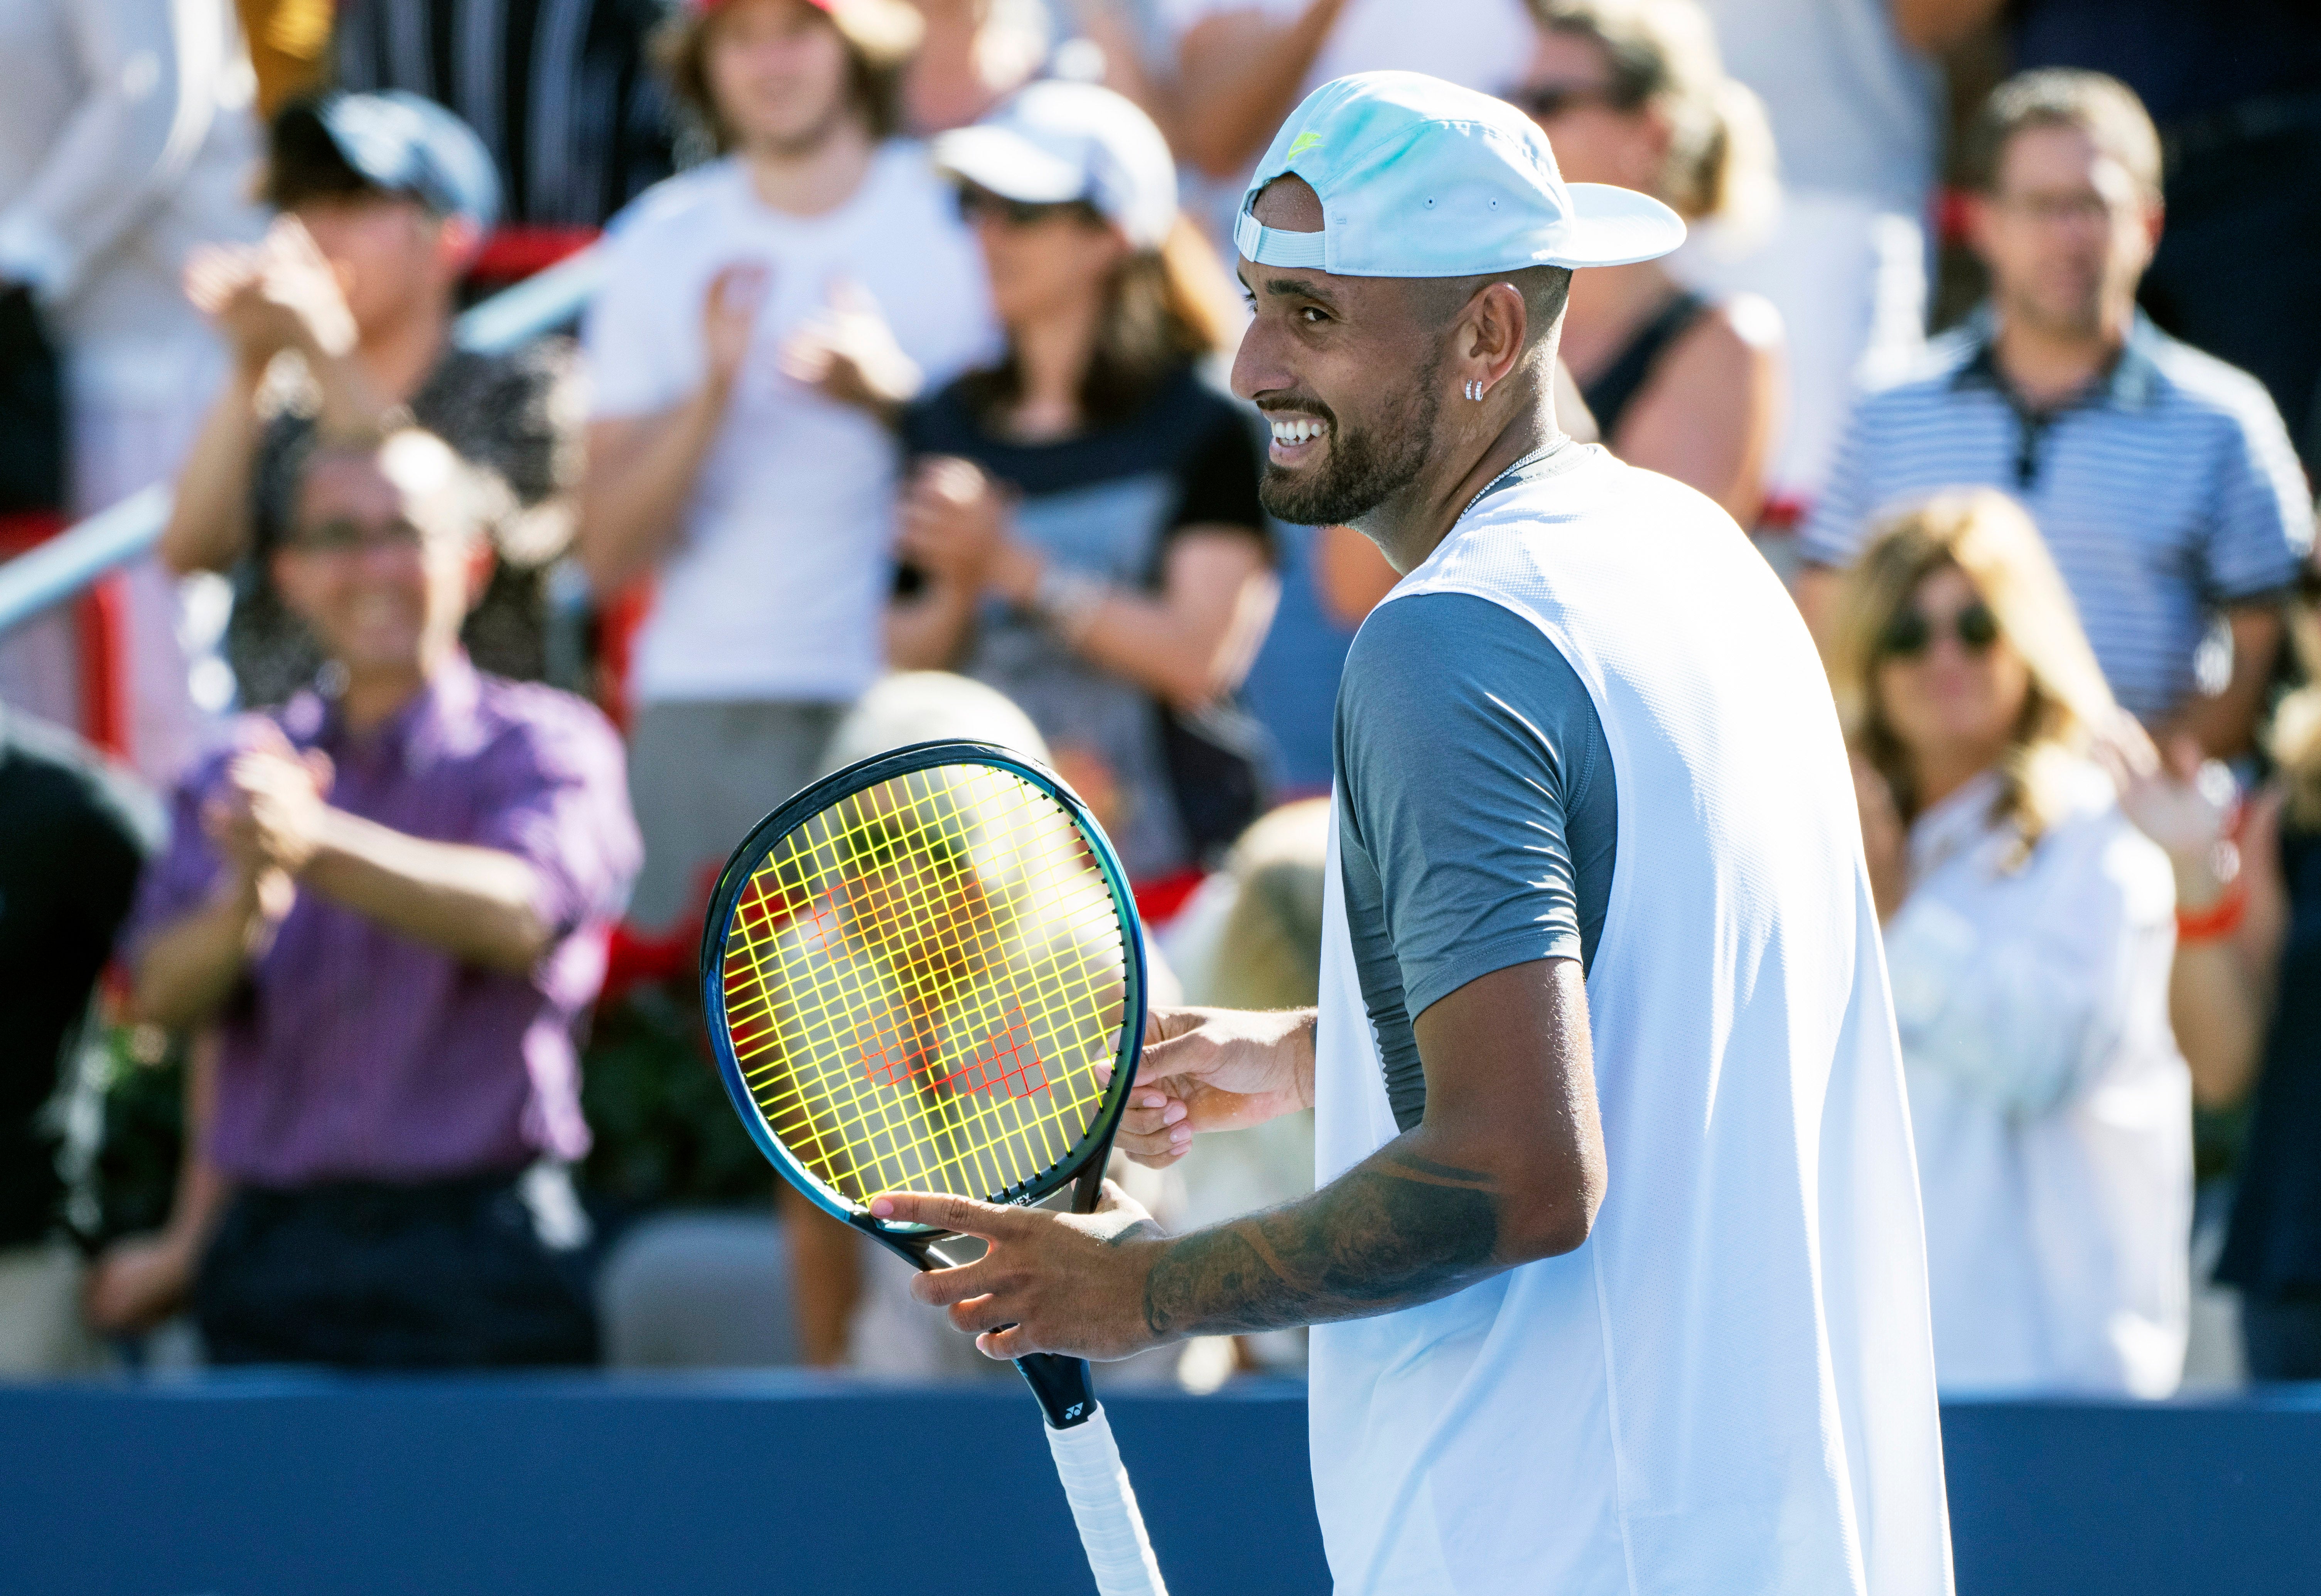 Nick Kyrgios is among those playing on the first day at the US Open